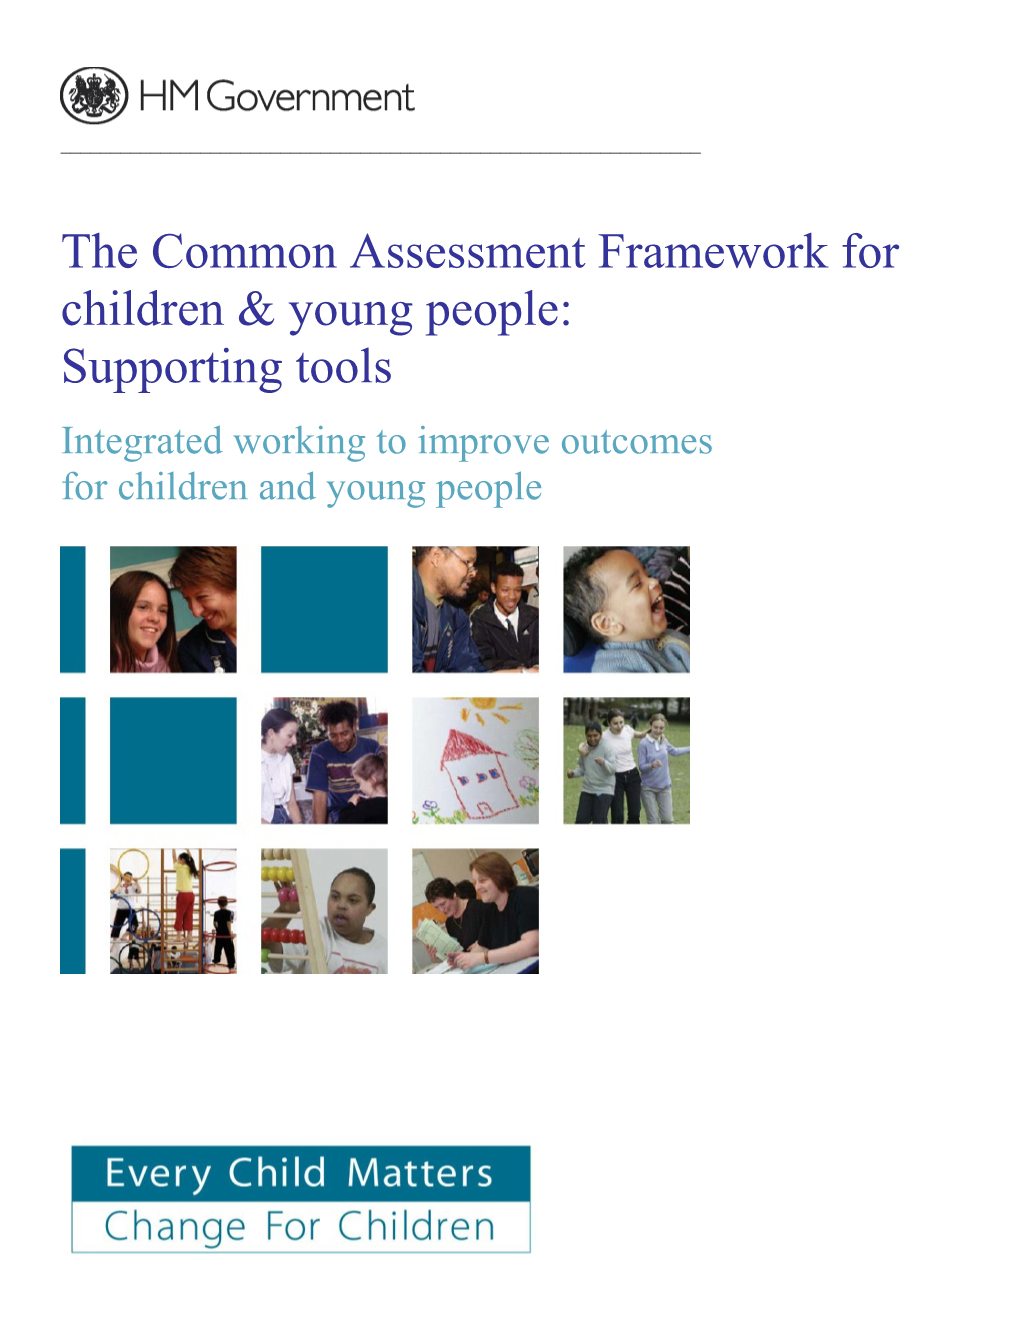 The Common Assessment Framework for Children & Young People